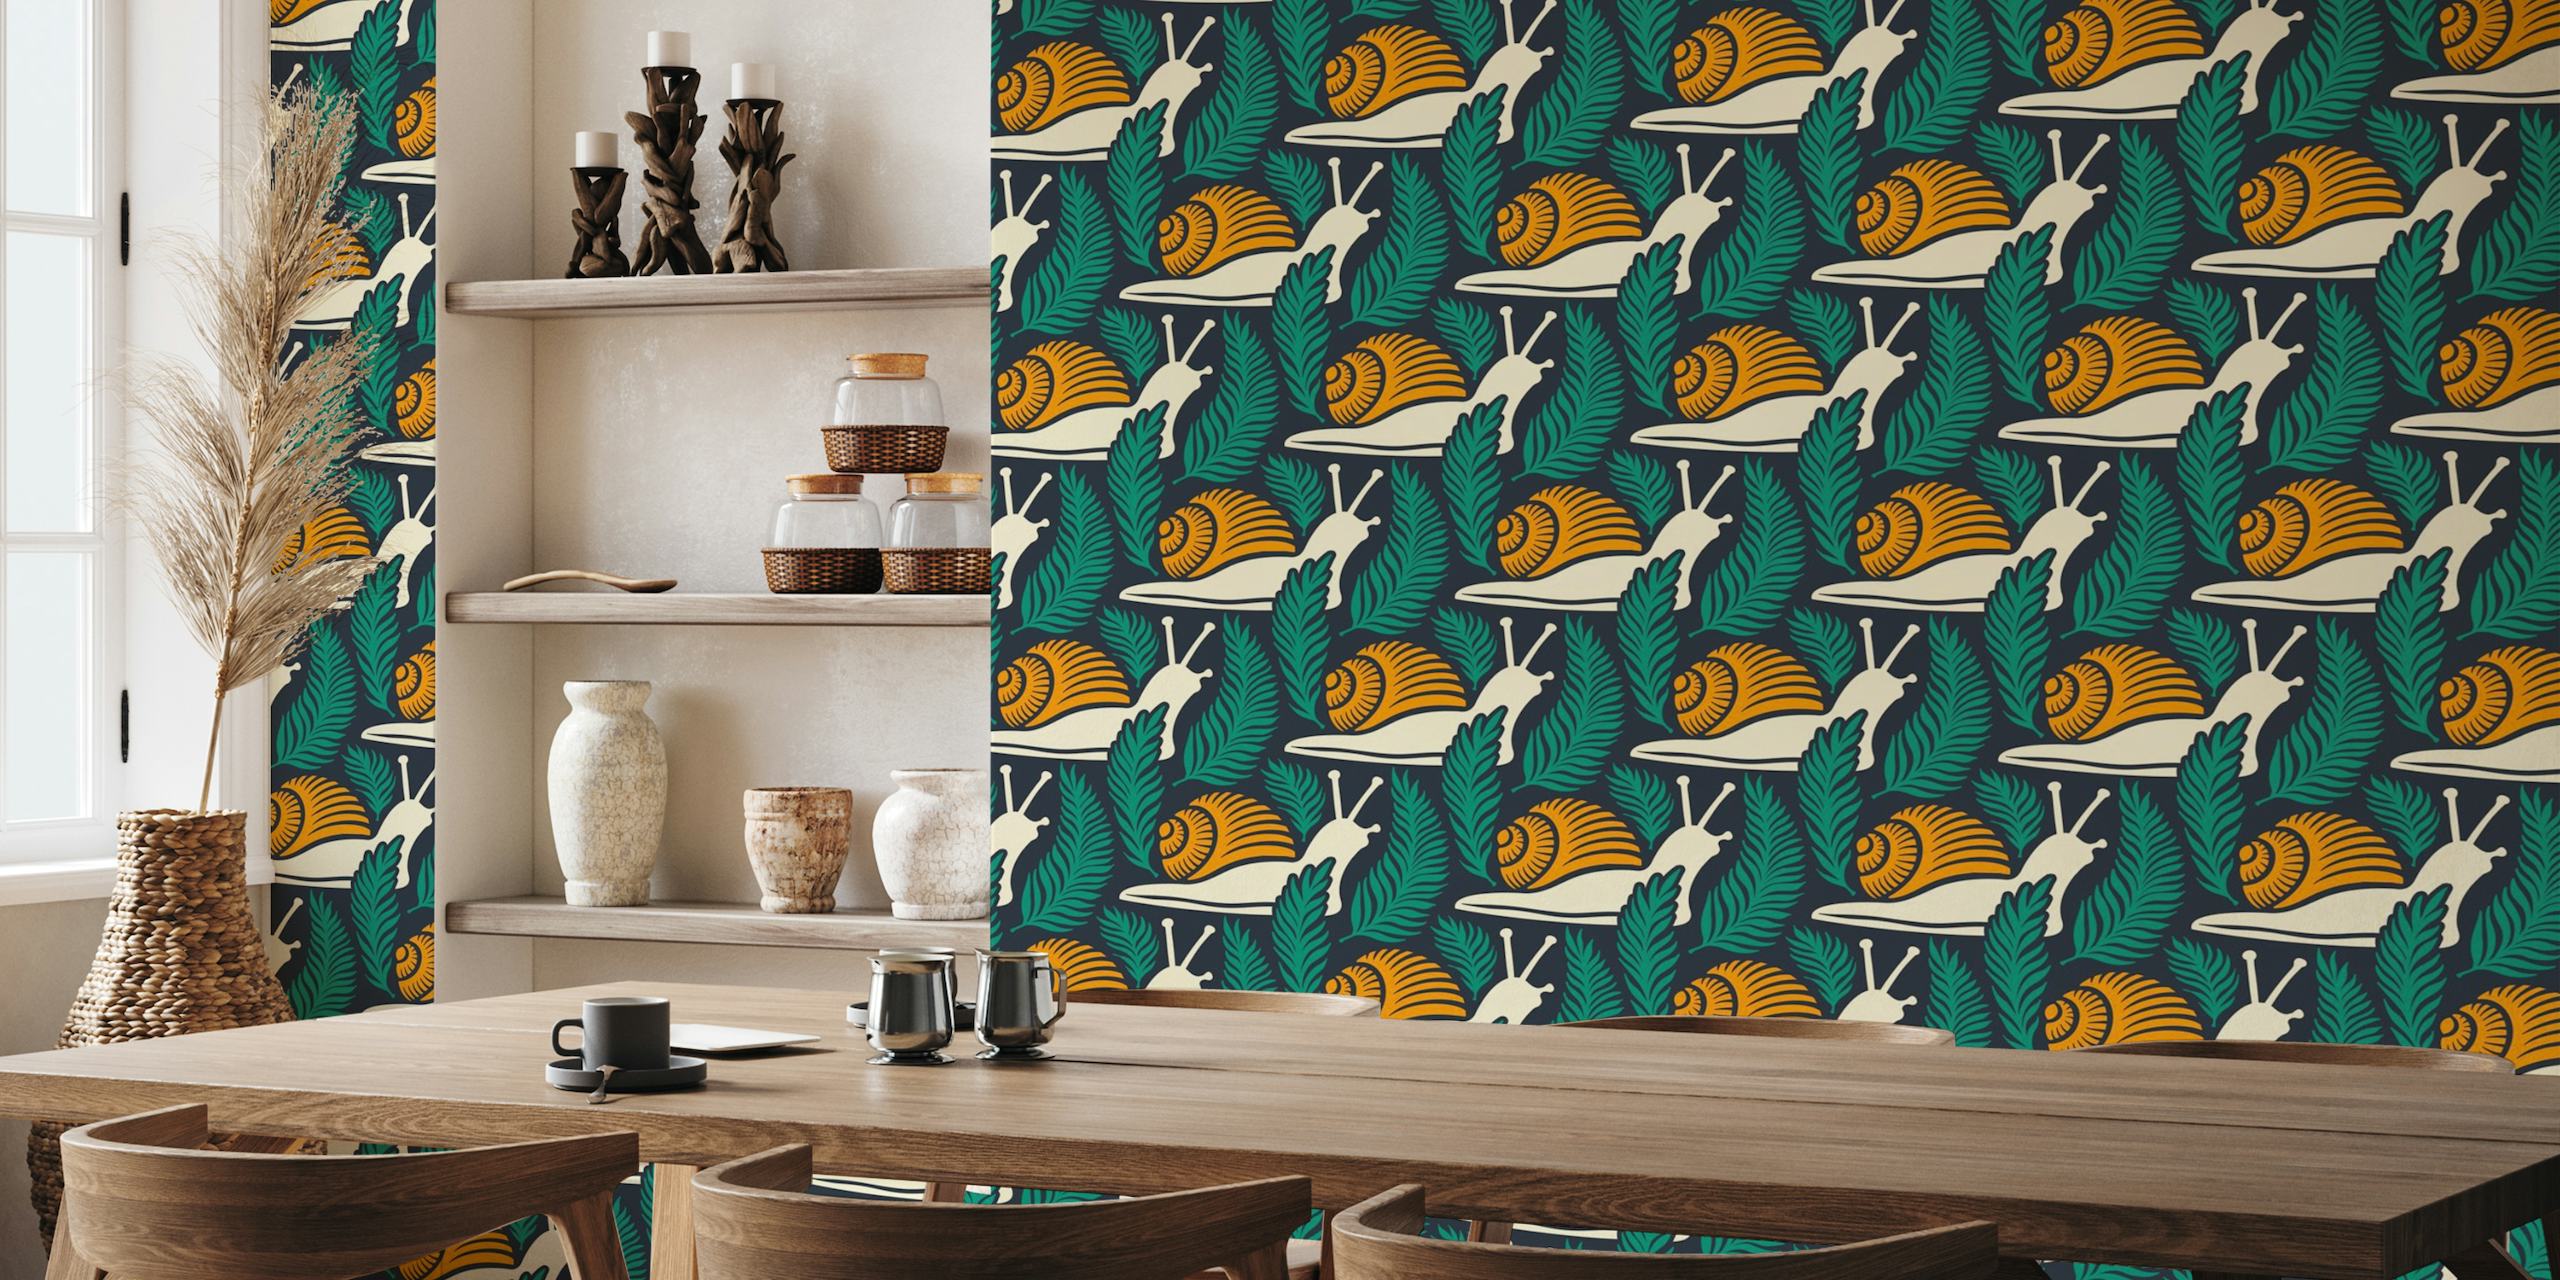 Snails in ferns, teal yellow / 3001 A tapetit